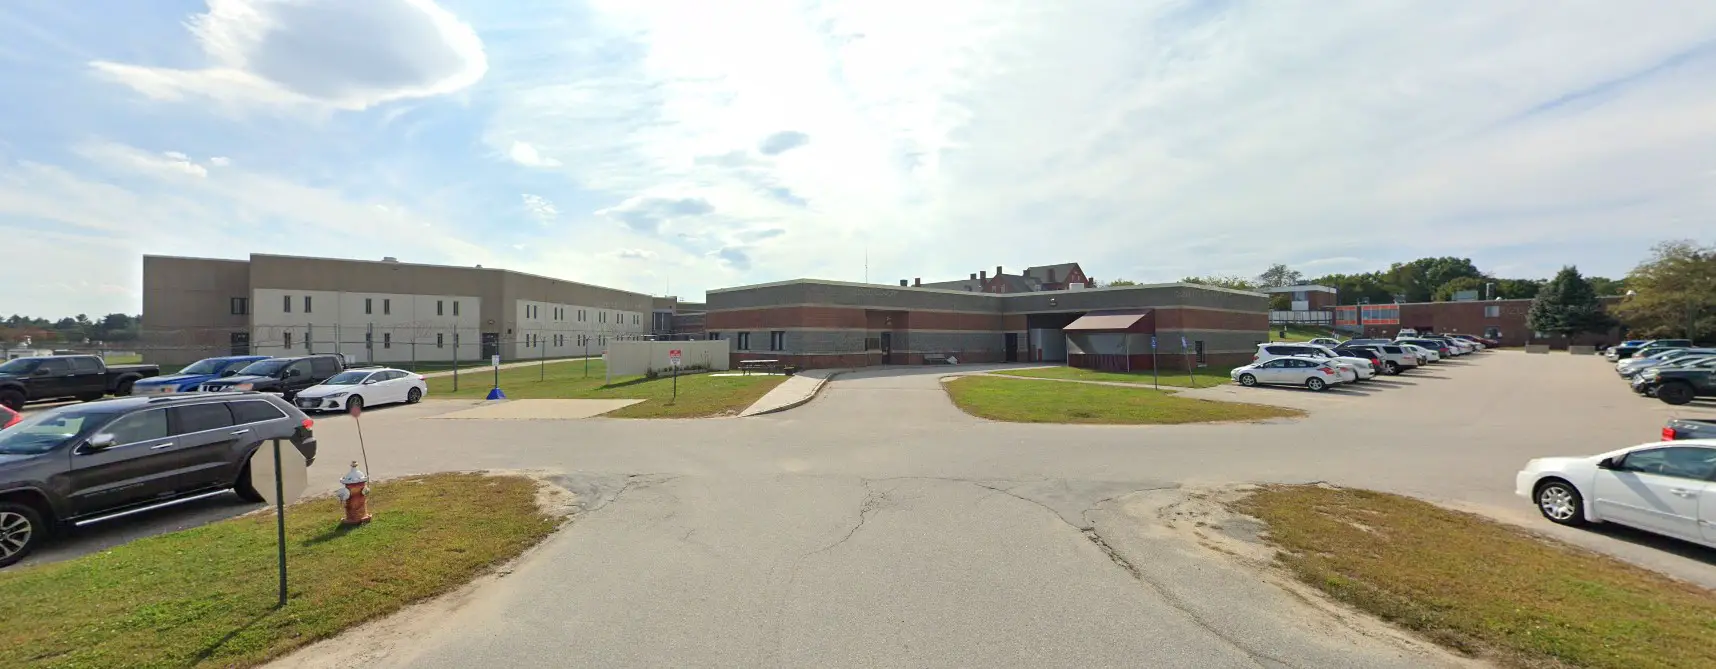 Photos Strafford County House of Corrections 4